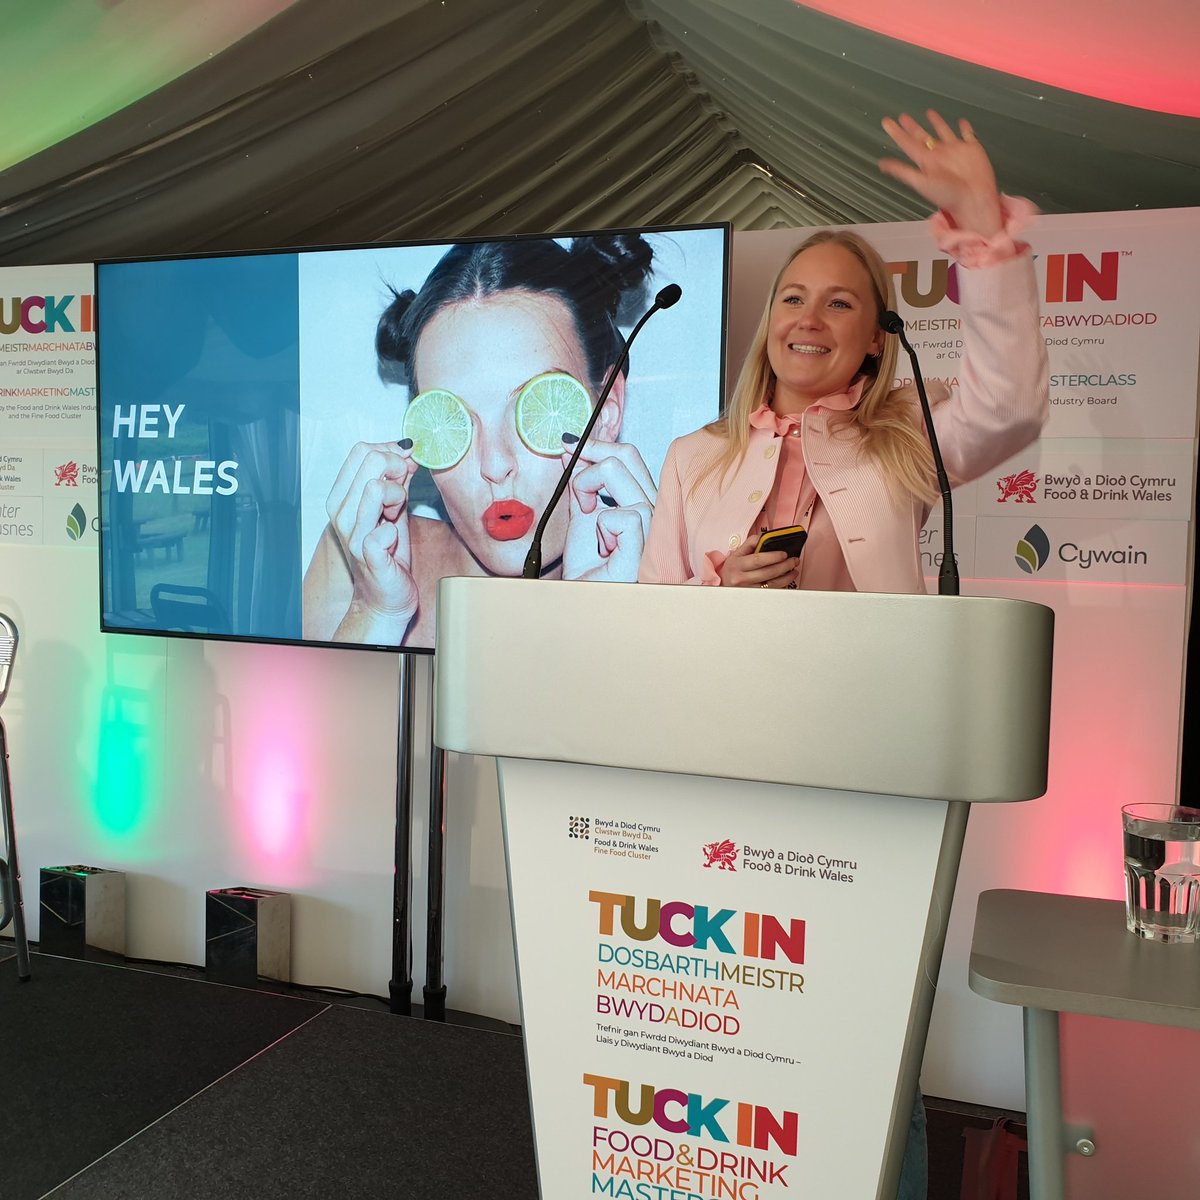 .@LucyKWright discusses building a disruptive #brand - her own #experience #launching @drink_nice , the #UK's first still #wine in a can #TuckIn #FDWIB #FoodDrinkWales #FoodandDrinkWalesClusterNetwork